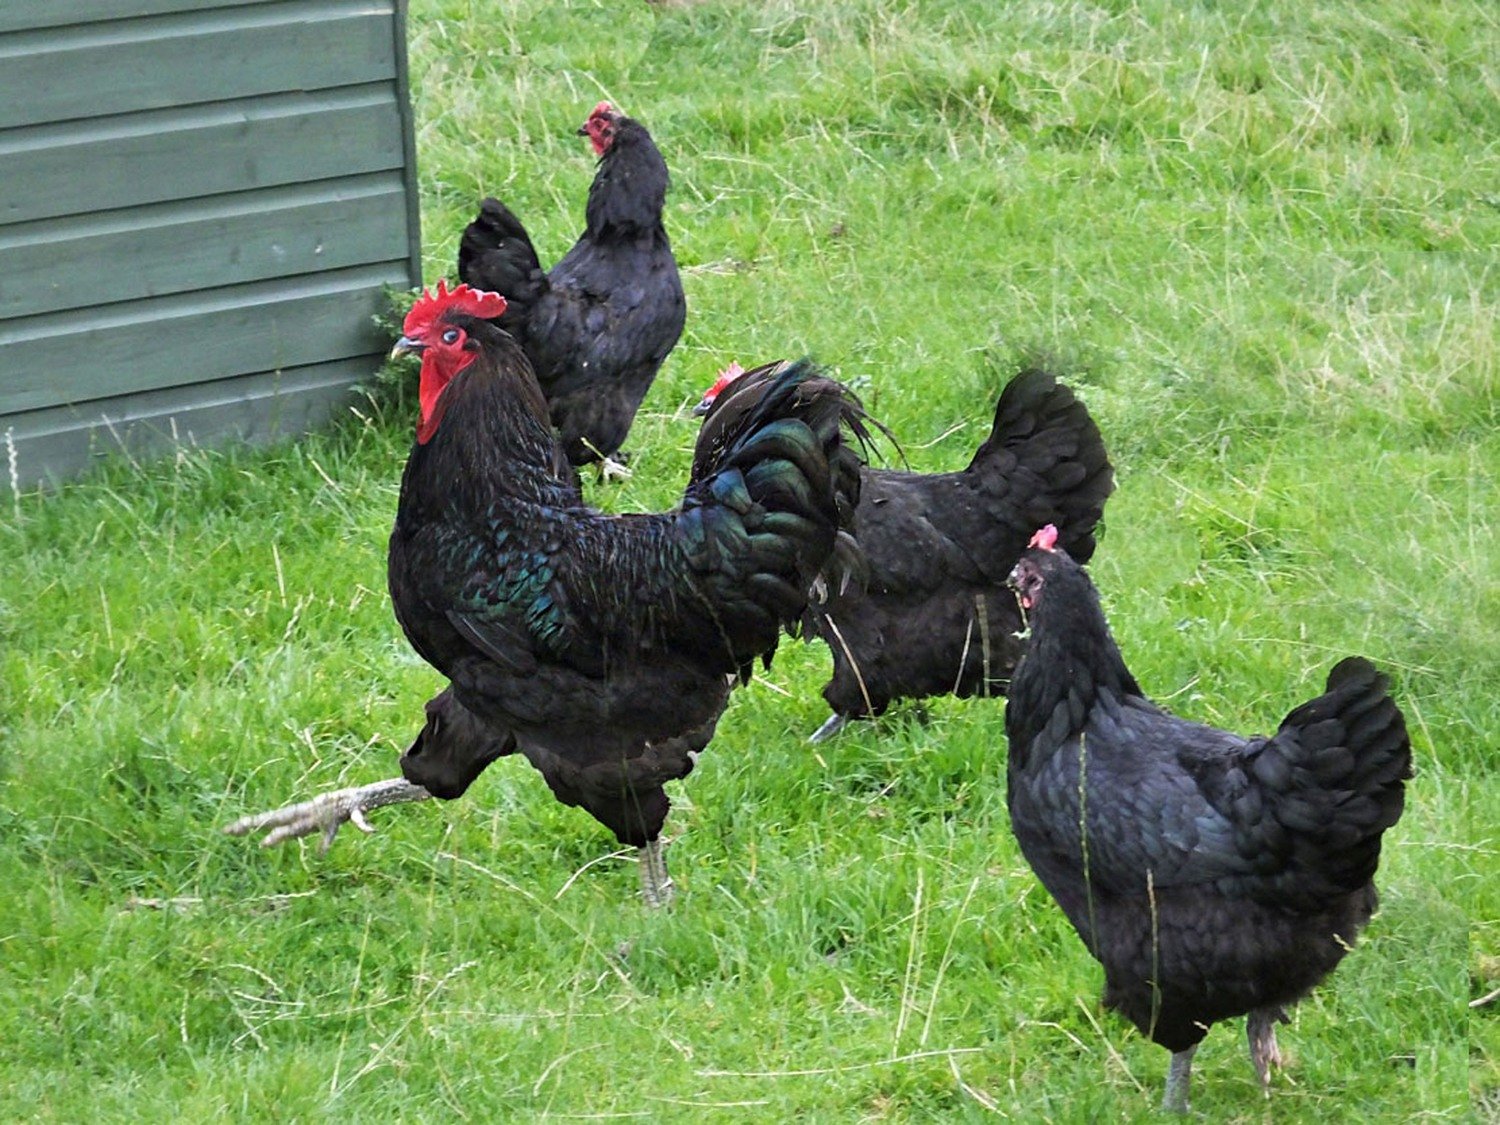 jersey black giant rooster